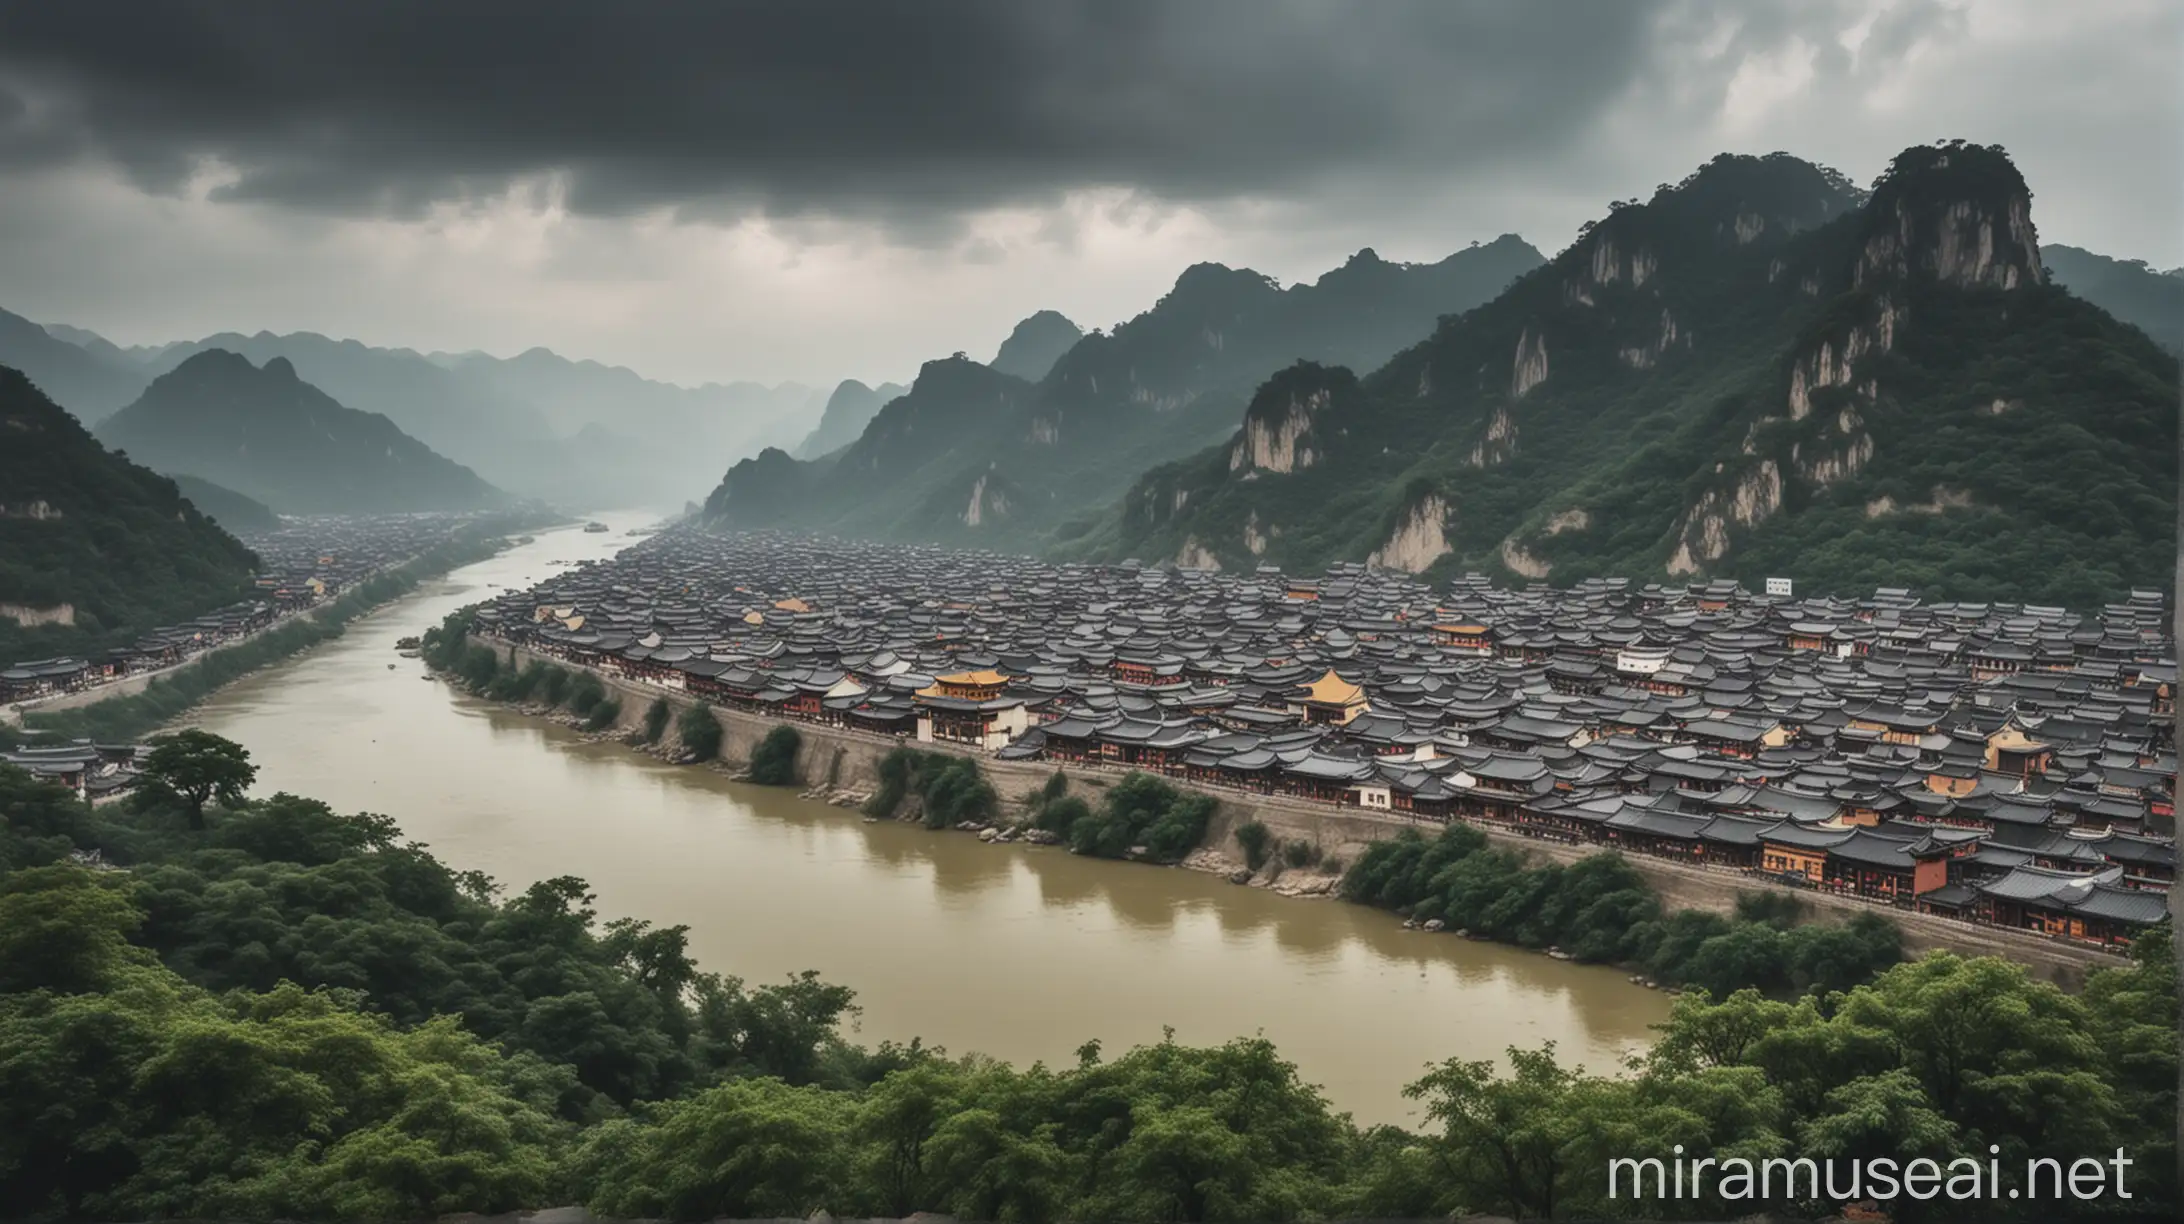 Wide shot of majestic, ancient cityscape of Jinling under the overcast, connecting to expansive mountainous lands, mood is contemplative, serene.